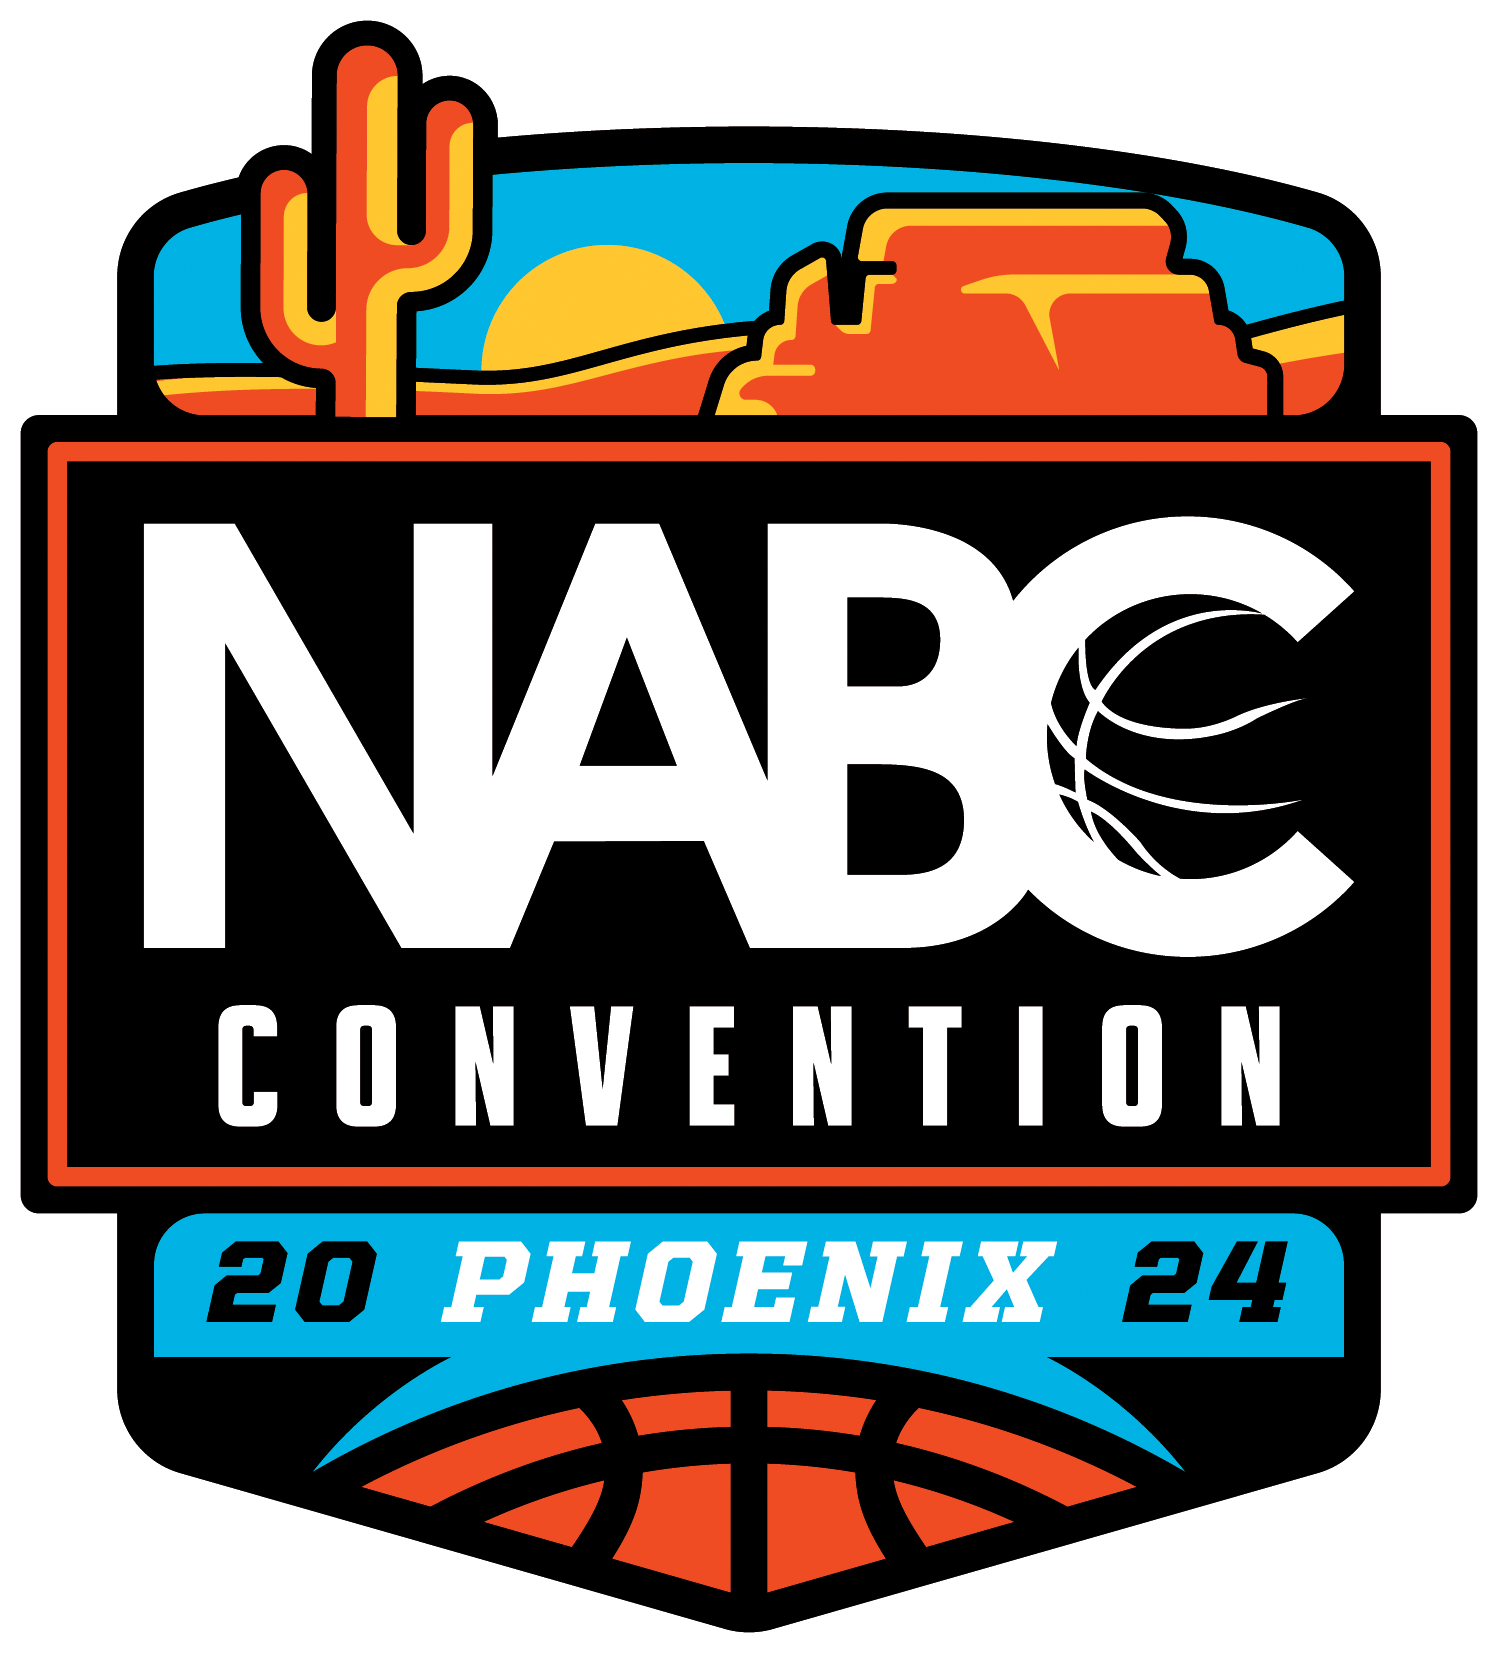 NABC Convention National Association of Basketball Coaches